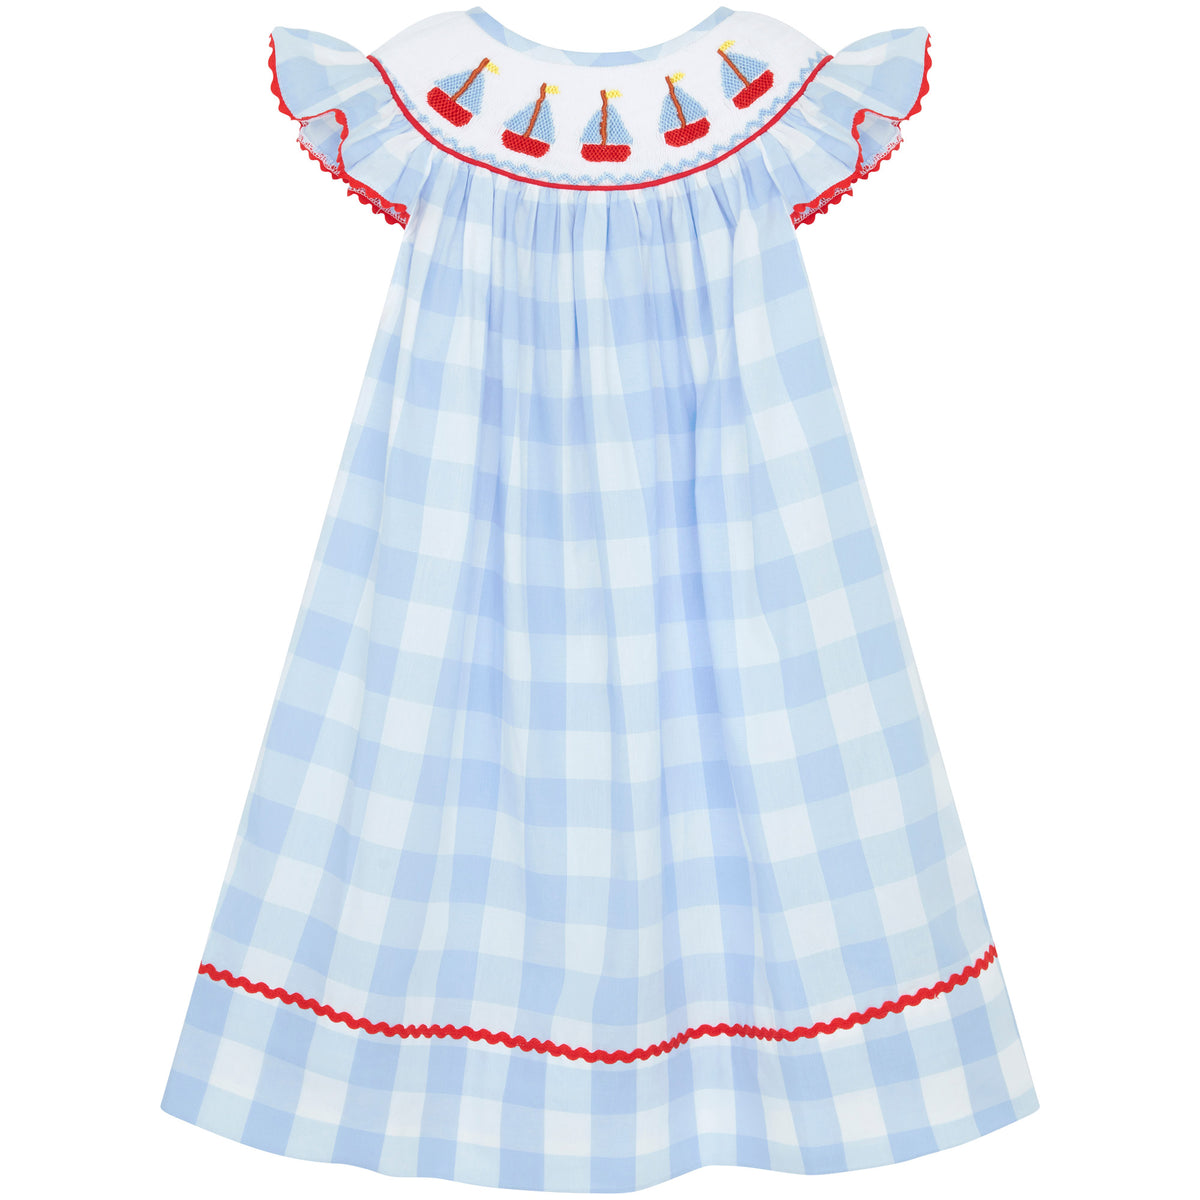 Little Princess Bella Hand Smocked Embroidered Sails Cotton Baby Dress Blue White Red | Holly Hastie London